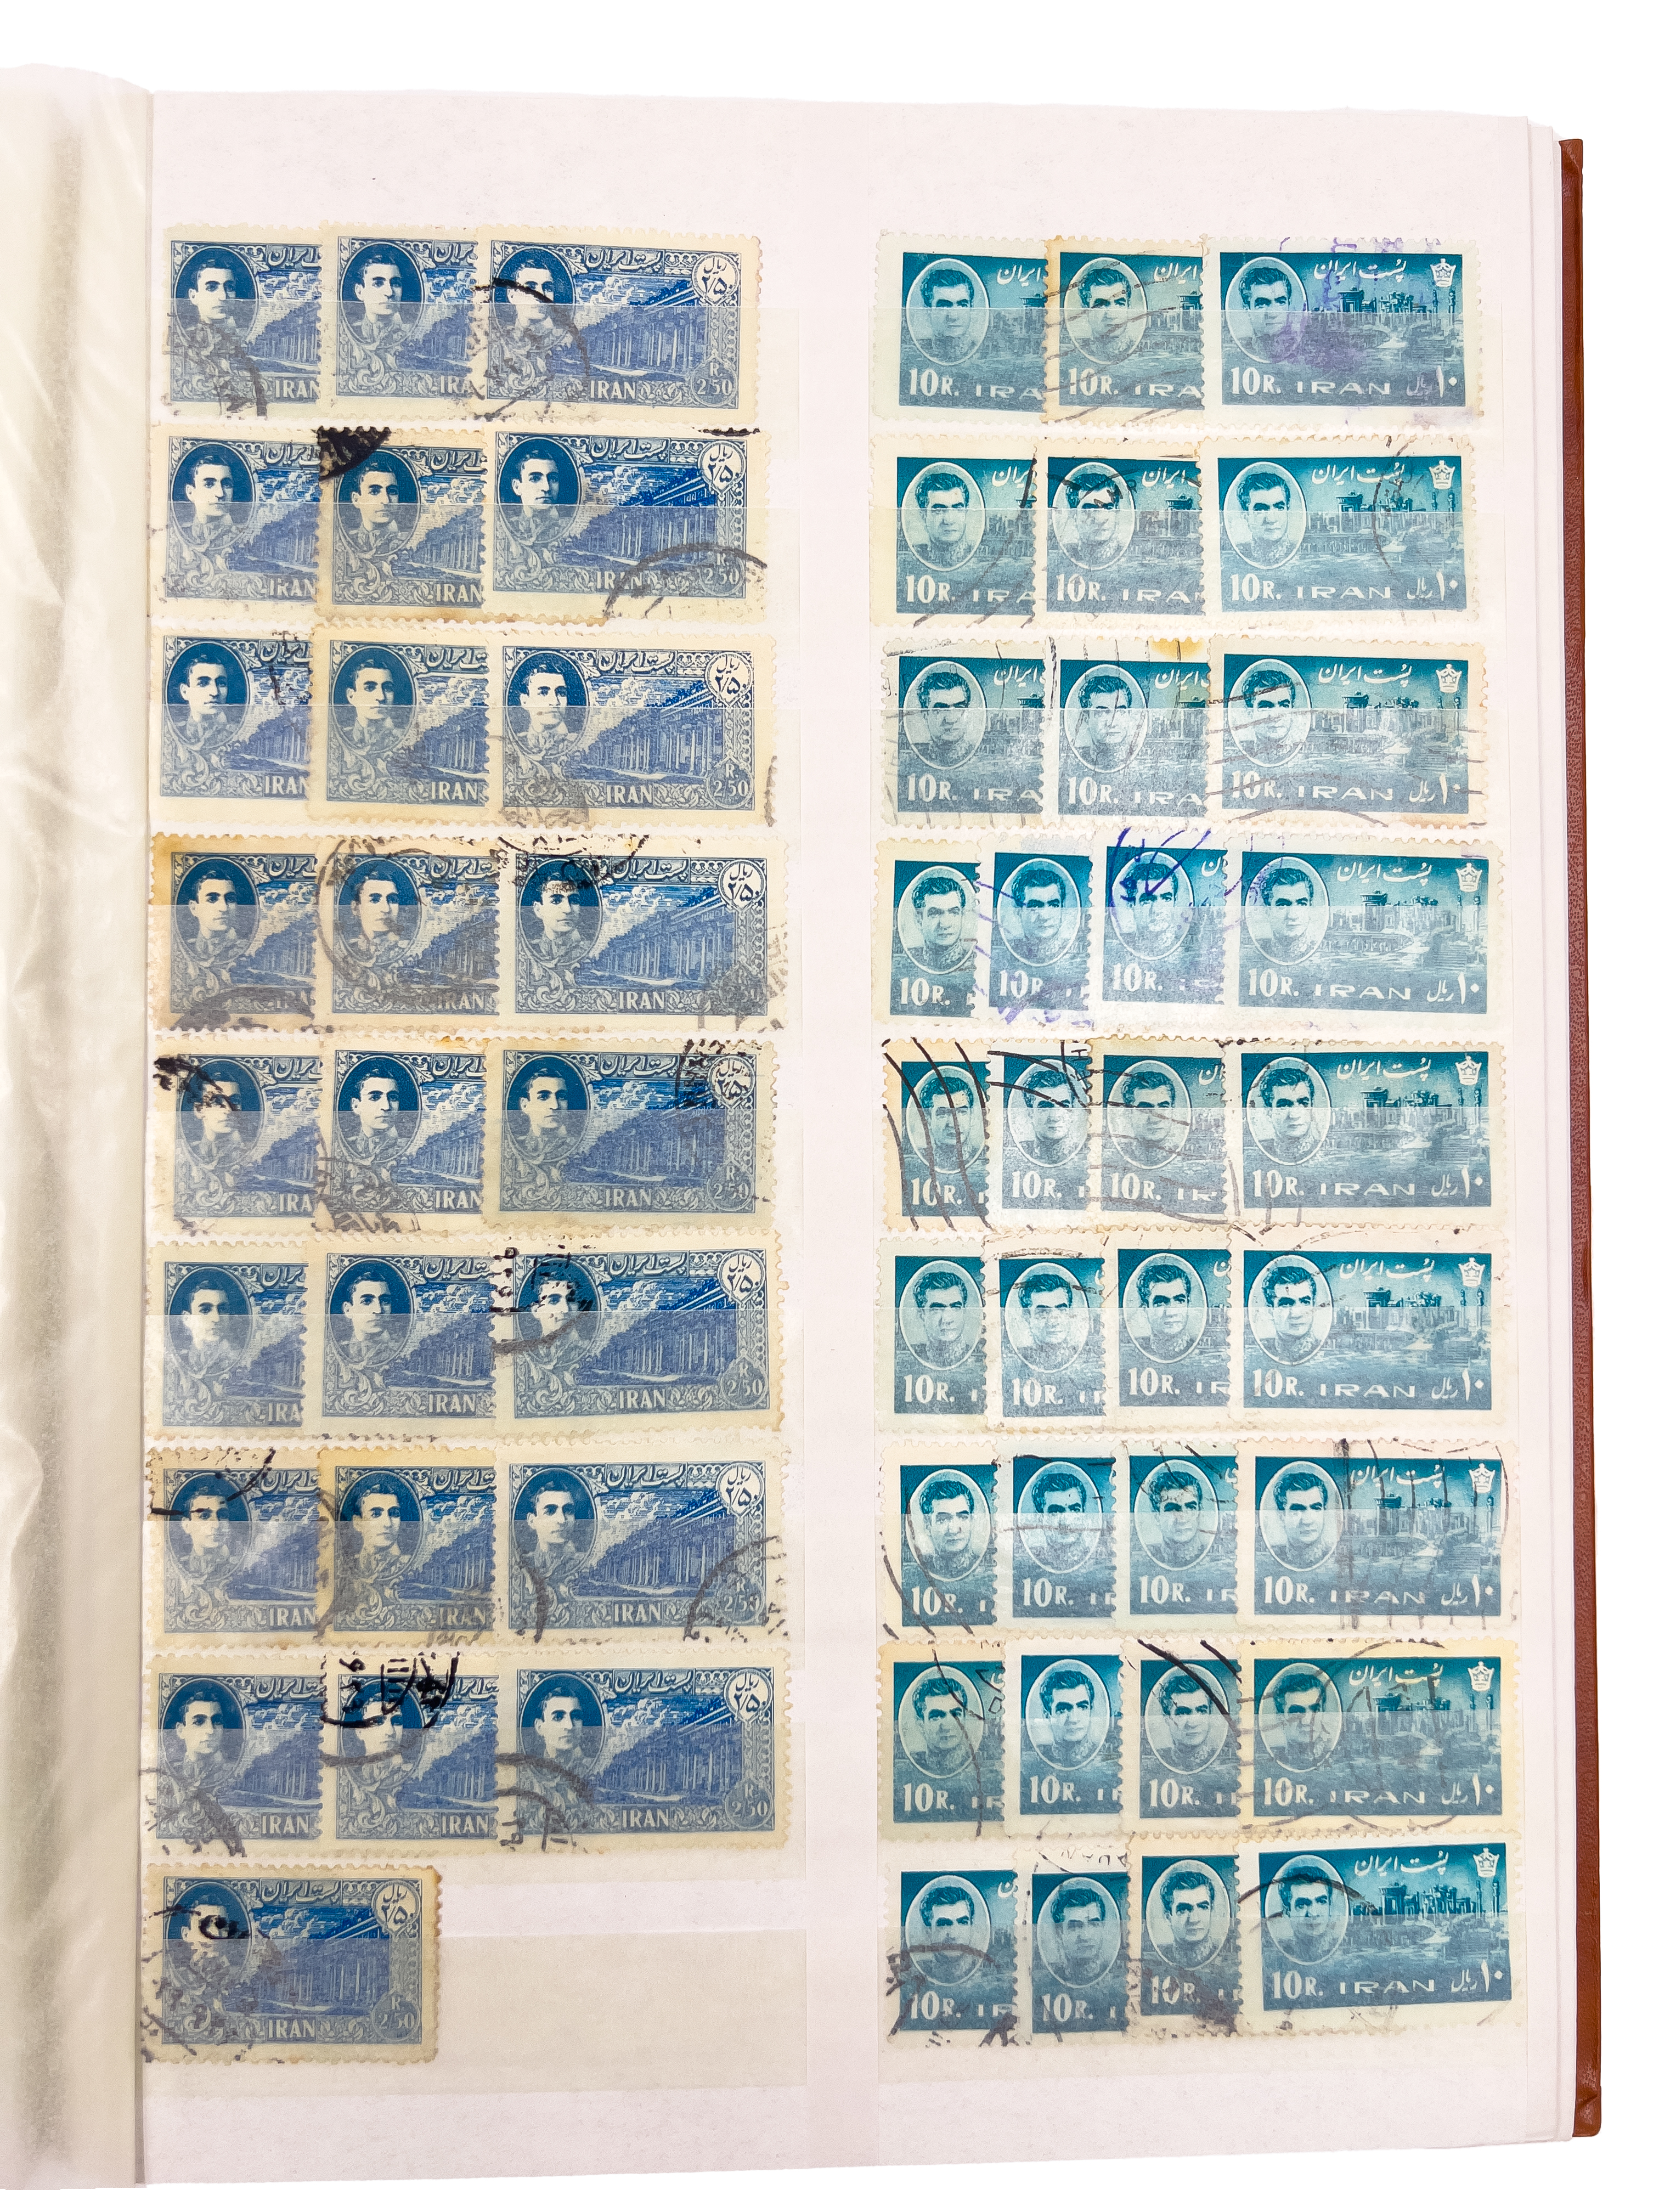 RARE & EXTENSIVE COLLECTION OF PERSIAN PAHLAVI POST STAMPS - Image 26 of 63